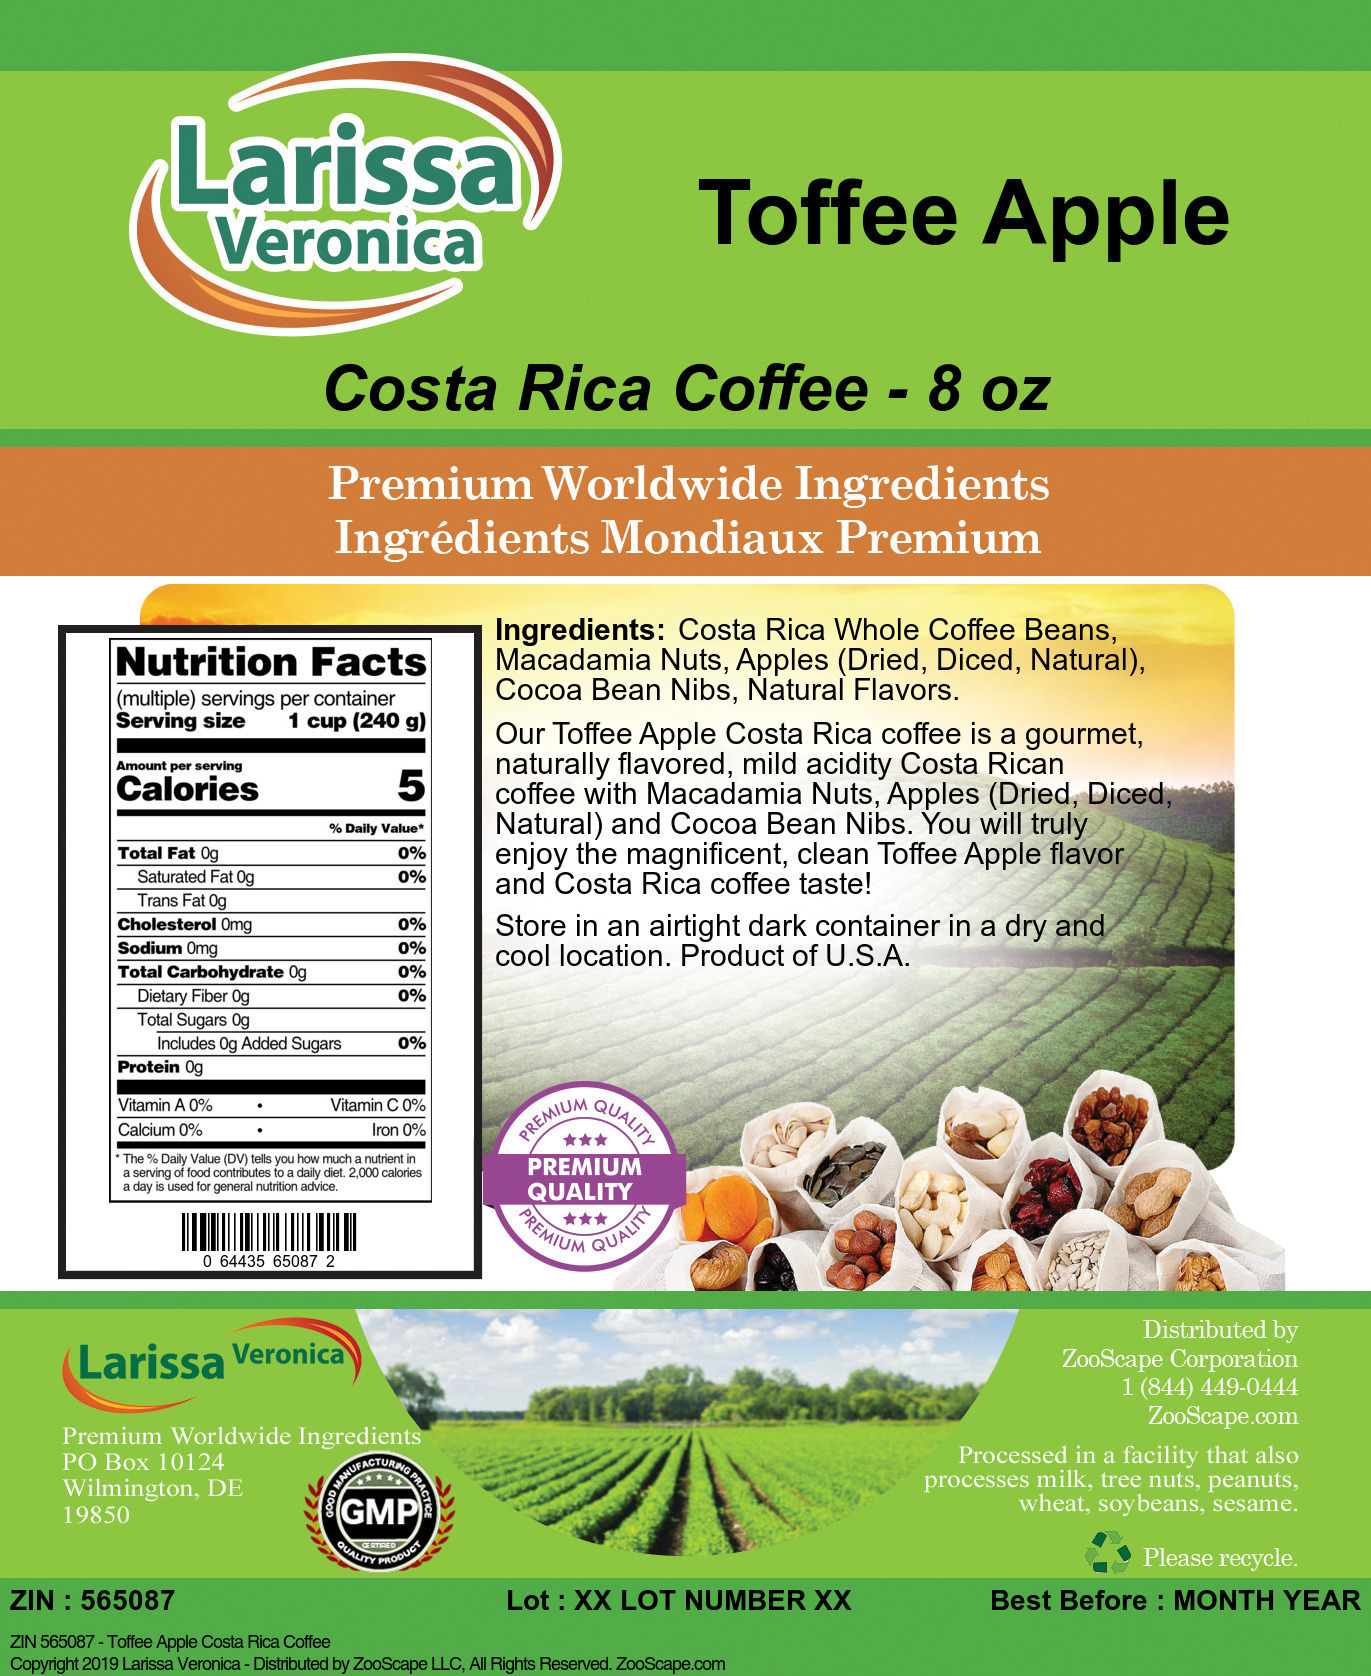 Toffee Apple Costa Rica Coffee - Label